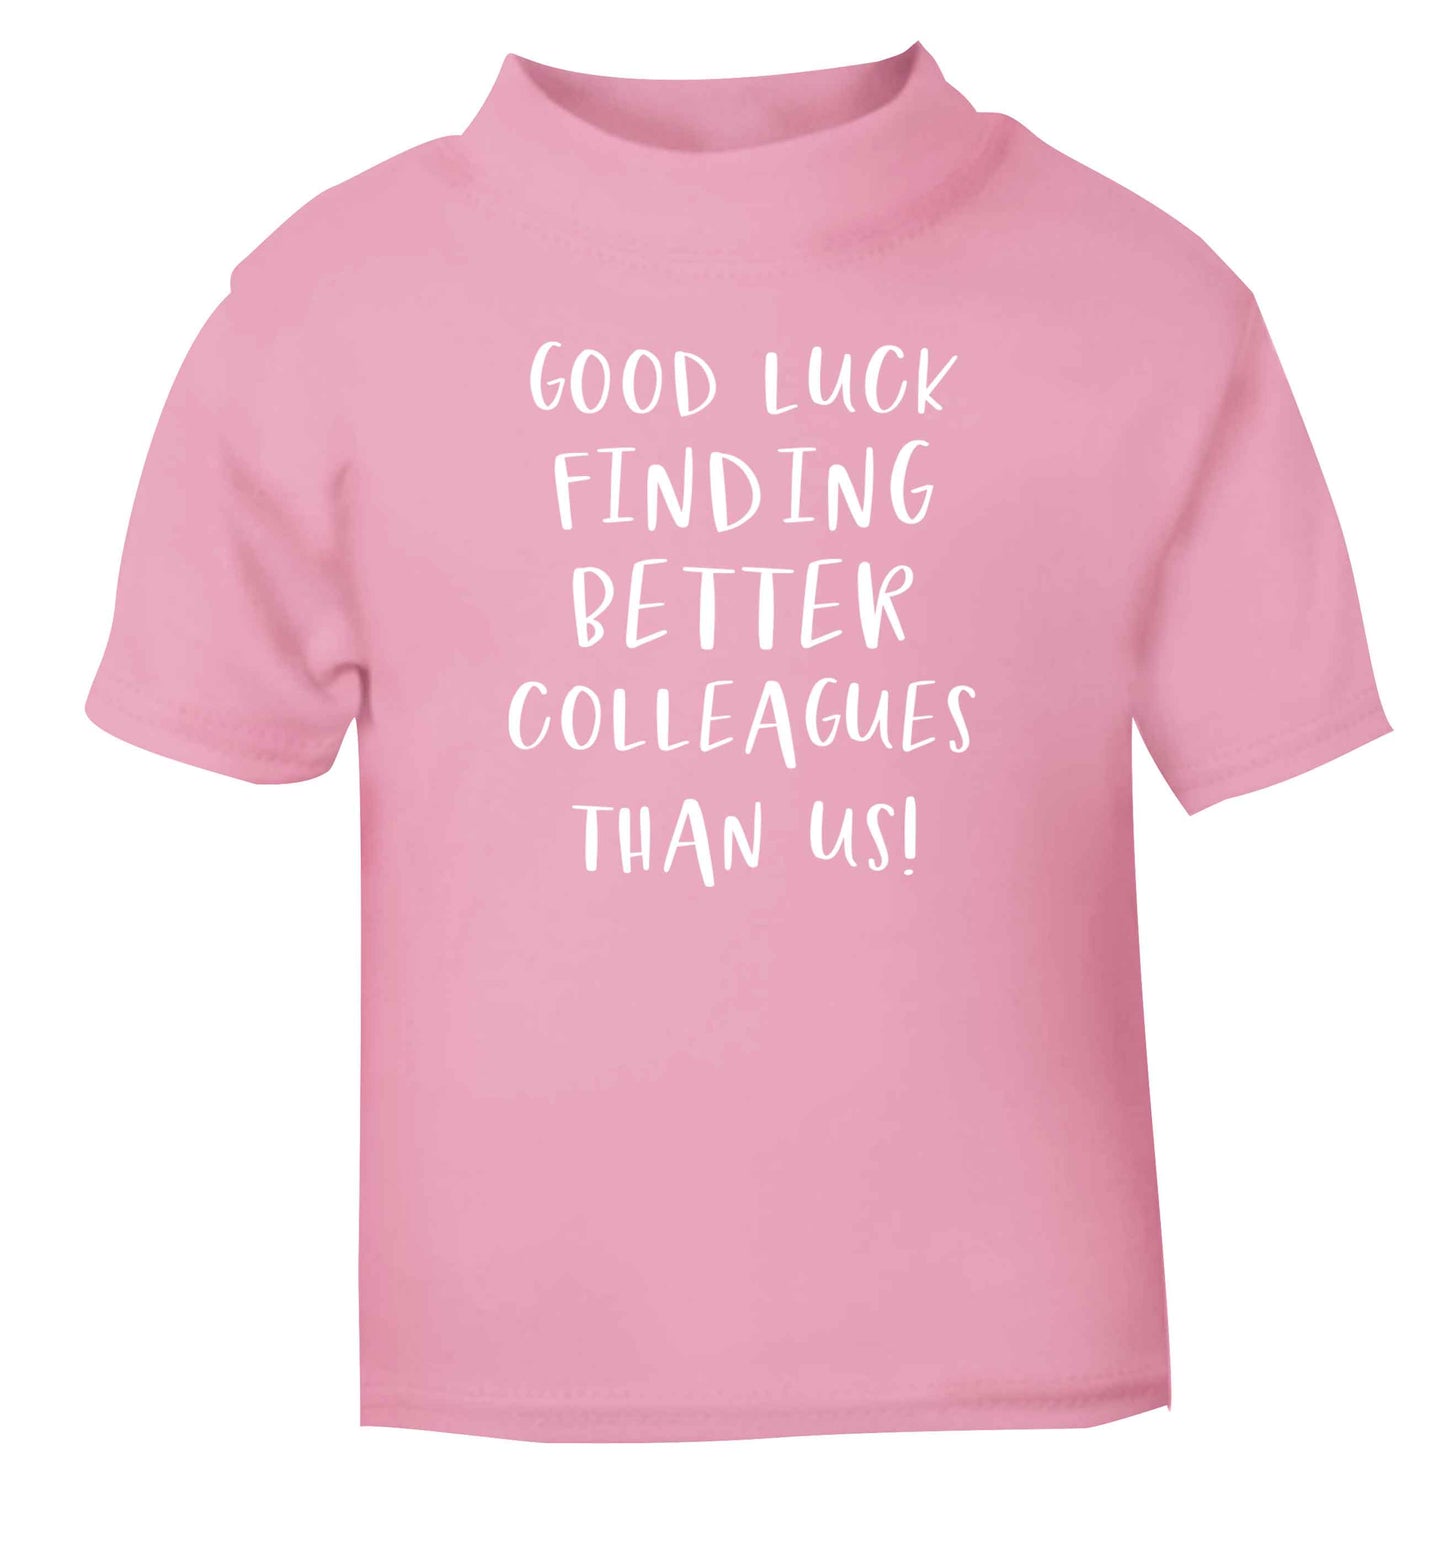 Good luck finding better colleagues than us! light pink Baby Toddler Tshirt 2 Years